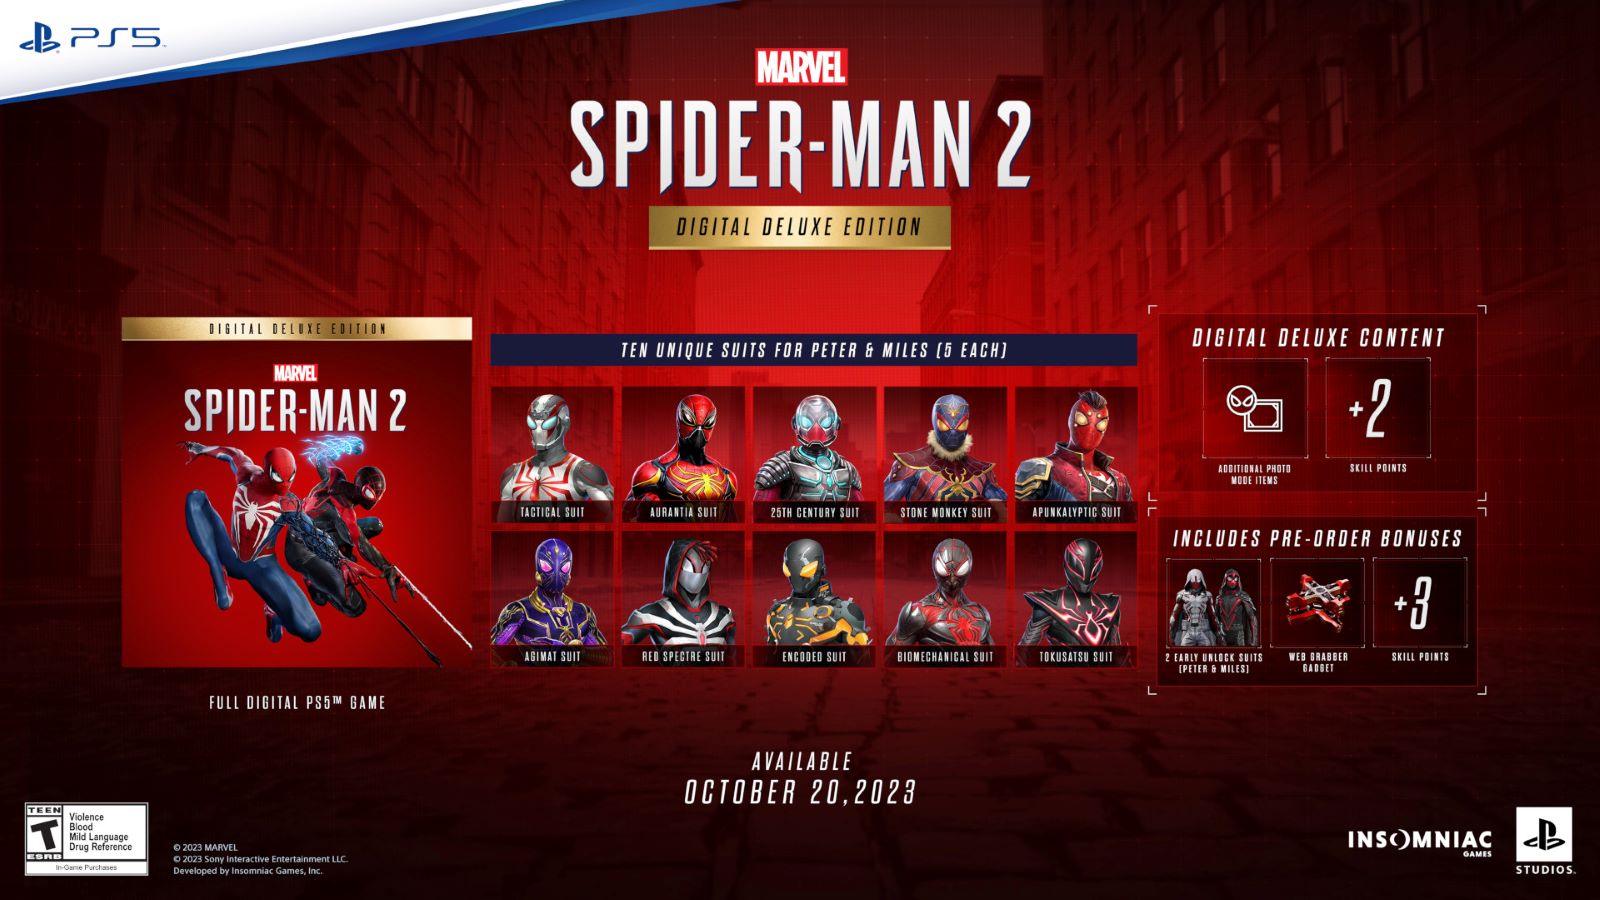 Marvel's 2 and Digital Deluxe Editions revealed alongside October release date GAMING TREND